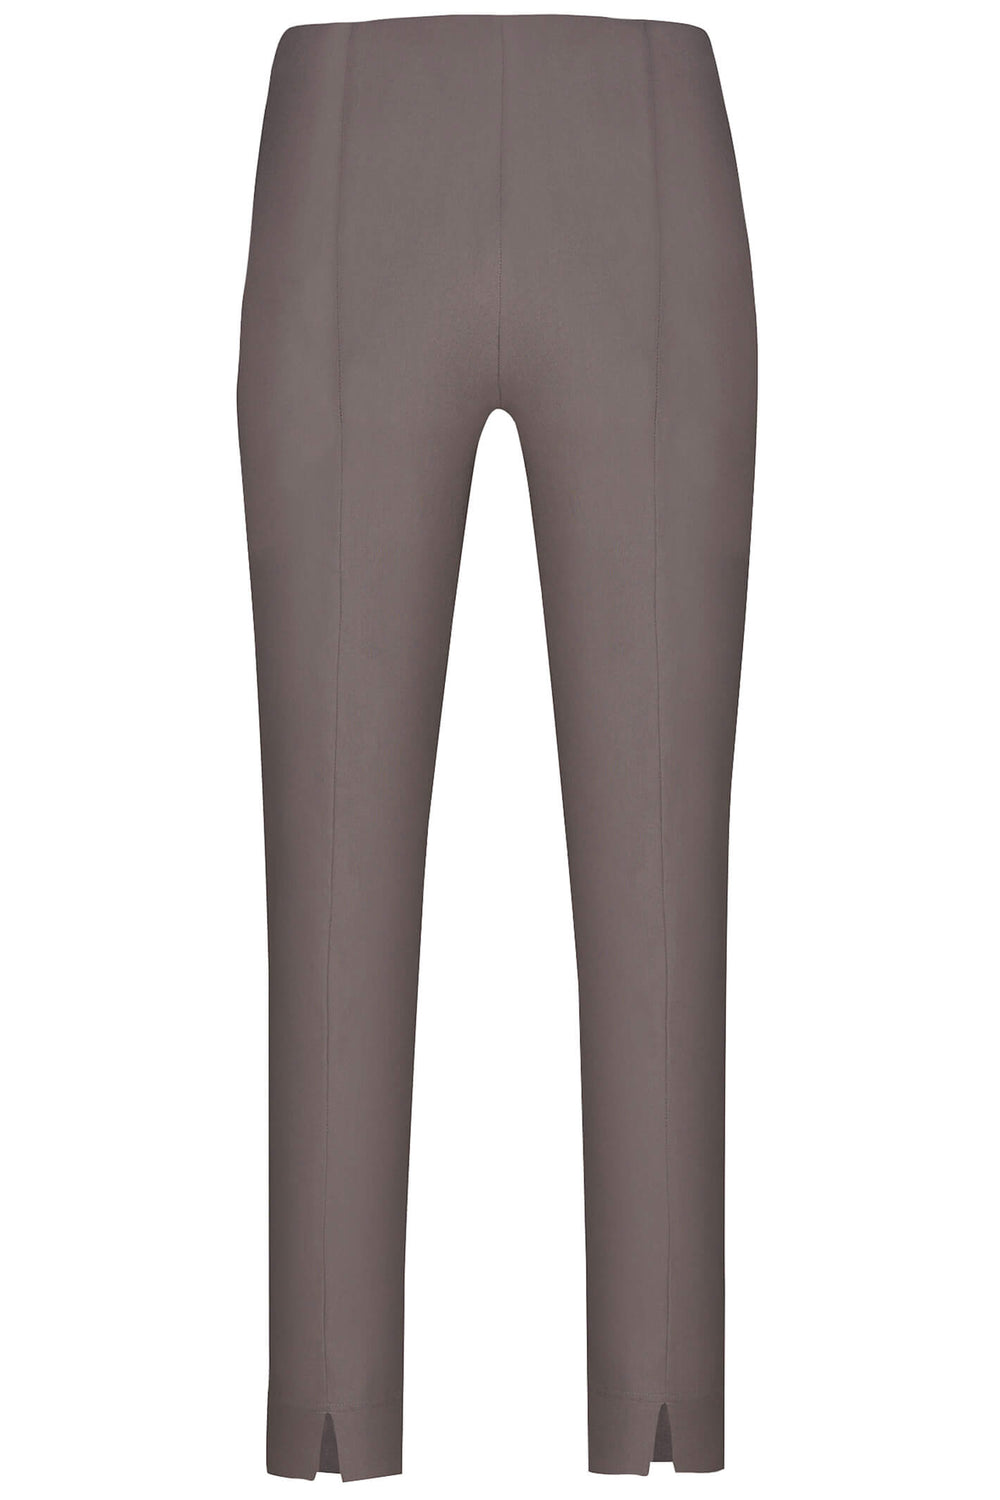 Robell 51527-5499-38 Rose 09 Almond Ankle Grazer 7/8 Length Trousers - Dotique